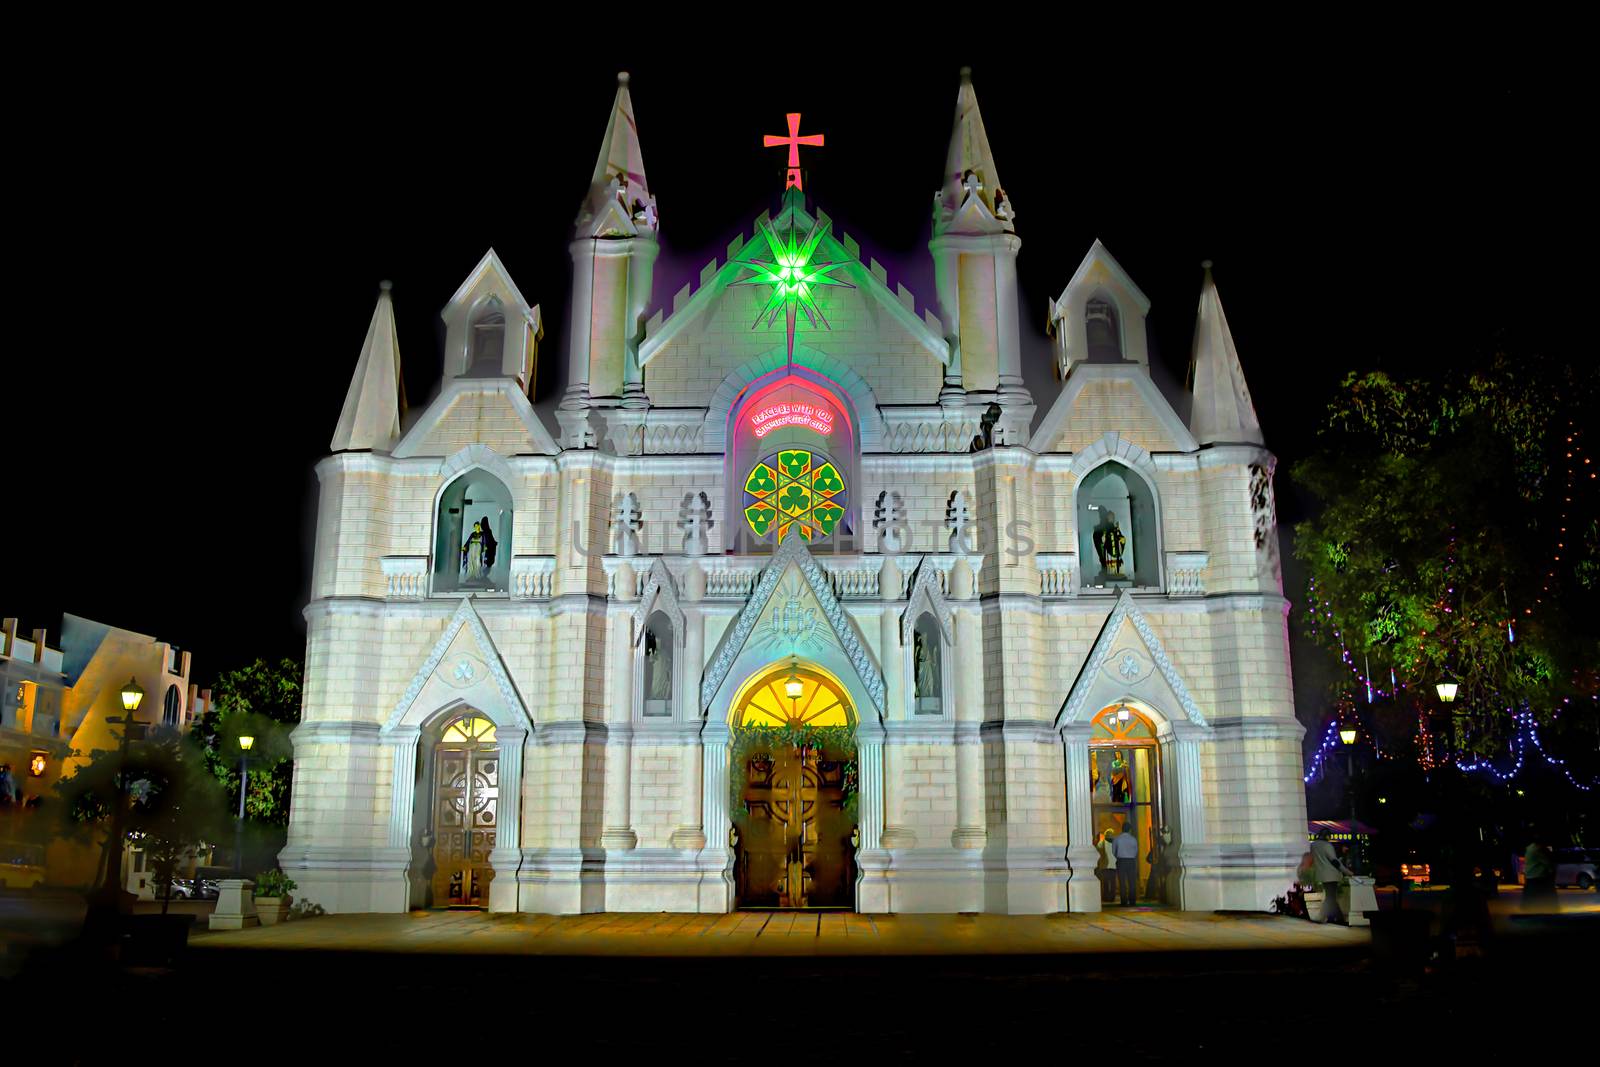 The 160 year old magnificent structure and an iconic landmark in the city - Saint Patrick’s Cathedral. It is specially illuminated on Christmas eve. by lalam